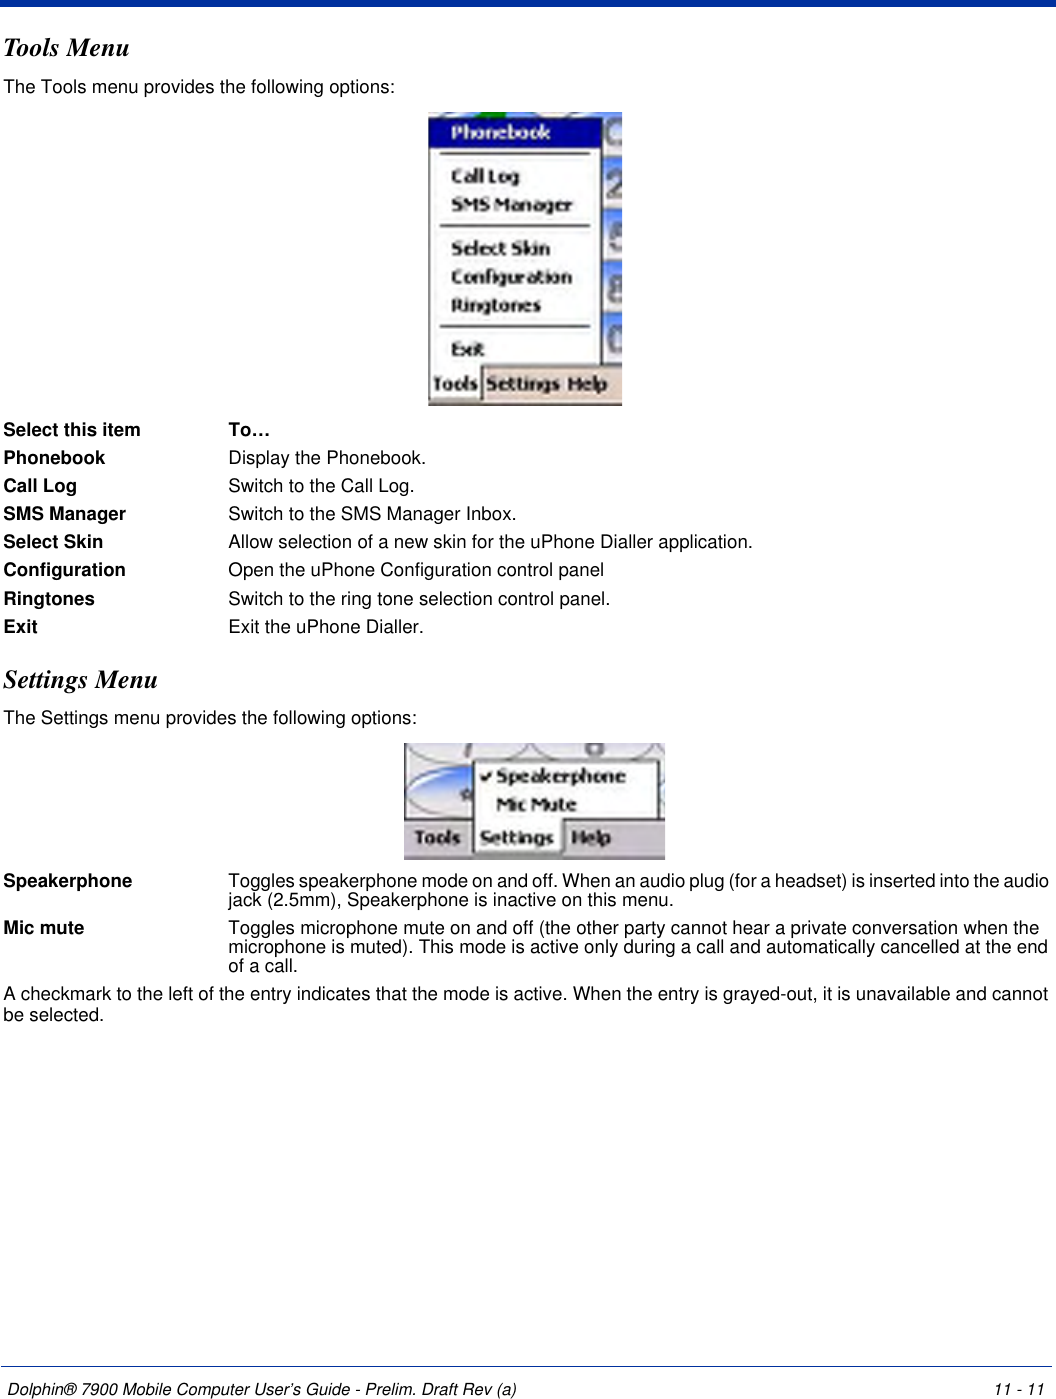 Dolphin® 7900 Mobile Computer User’s Guide - Prelim. Draft Rev (a) 11 - 11Tools MenuThe Tools menu provides the following options: Select this item To…Phonebook Display the Phonebook.Call Log Switch to the Call Log.SMS Manager Switch to the SMS Manager Inbox.Select Skin Allow selection of a new skin for the uPhone Dialler application.Configuration Open the uPhone Configuration control panelRingtones Switch to the ring tone selection control panel.Exit Exit the uPhone Dialler.Settings MenuThe Settings menu provides the following options: Speakerphone Toggles speakerphone mode on and off. When an audio plug (for a headset) is inserted into the audio jack (2.5mm), Speakerphone is inactive on this menu.Mic mute Toggles microphone mute on and off (the other party cannot hear a private conversation when the microphone is muted). This mode is active only during a call and automatically cancelled at the end of a call.A checkmark to the left of the entry indicates that the mode is active. When the entry is grayed-out, it is unavailable and cannot be selected. 